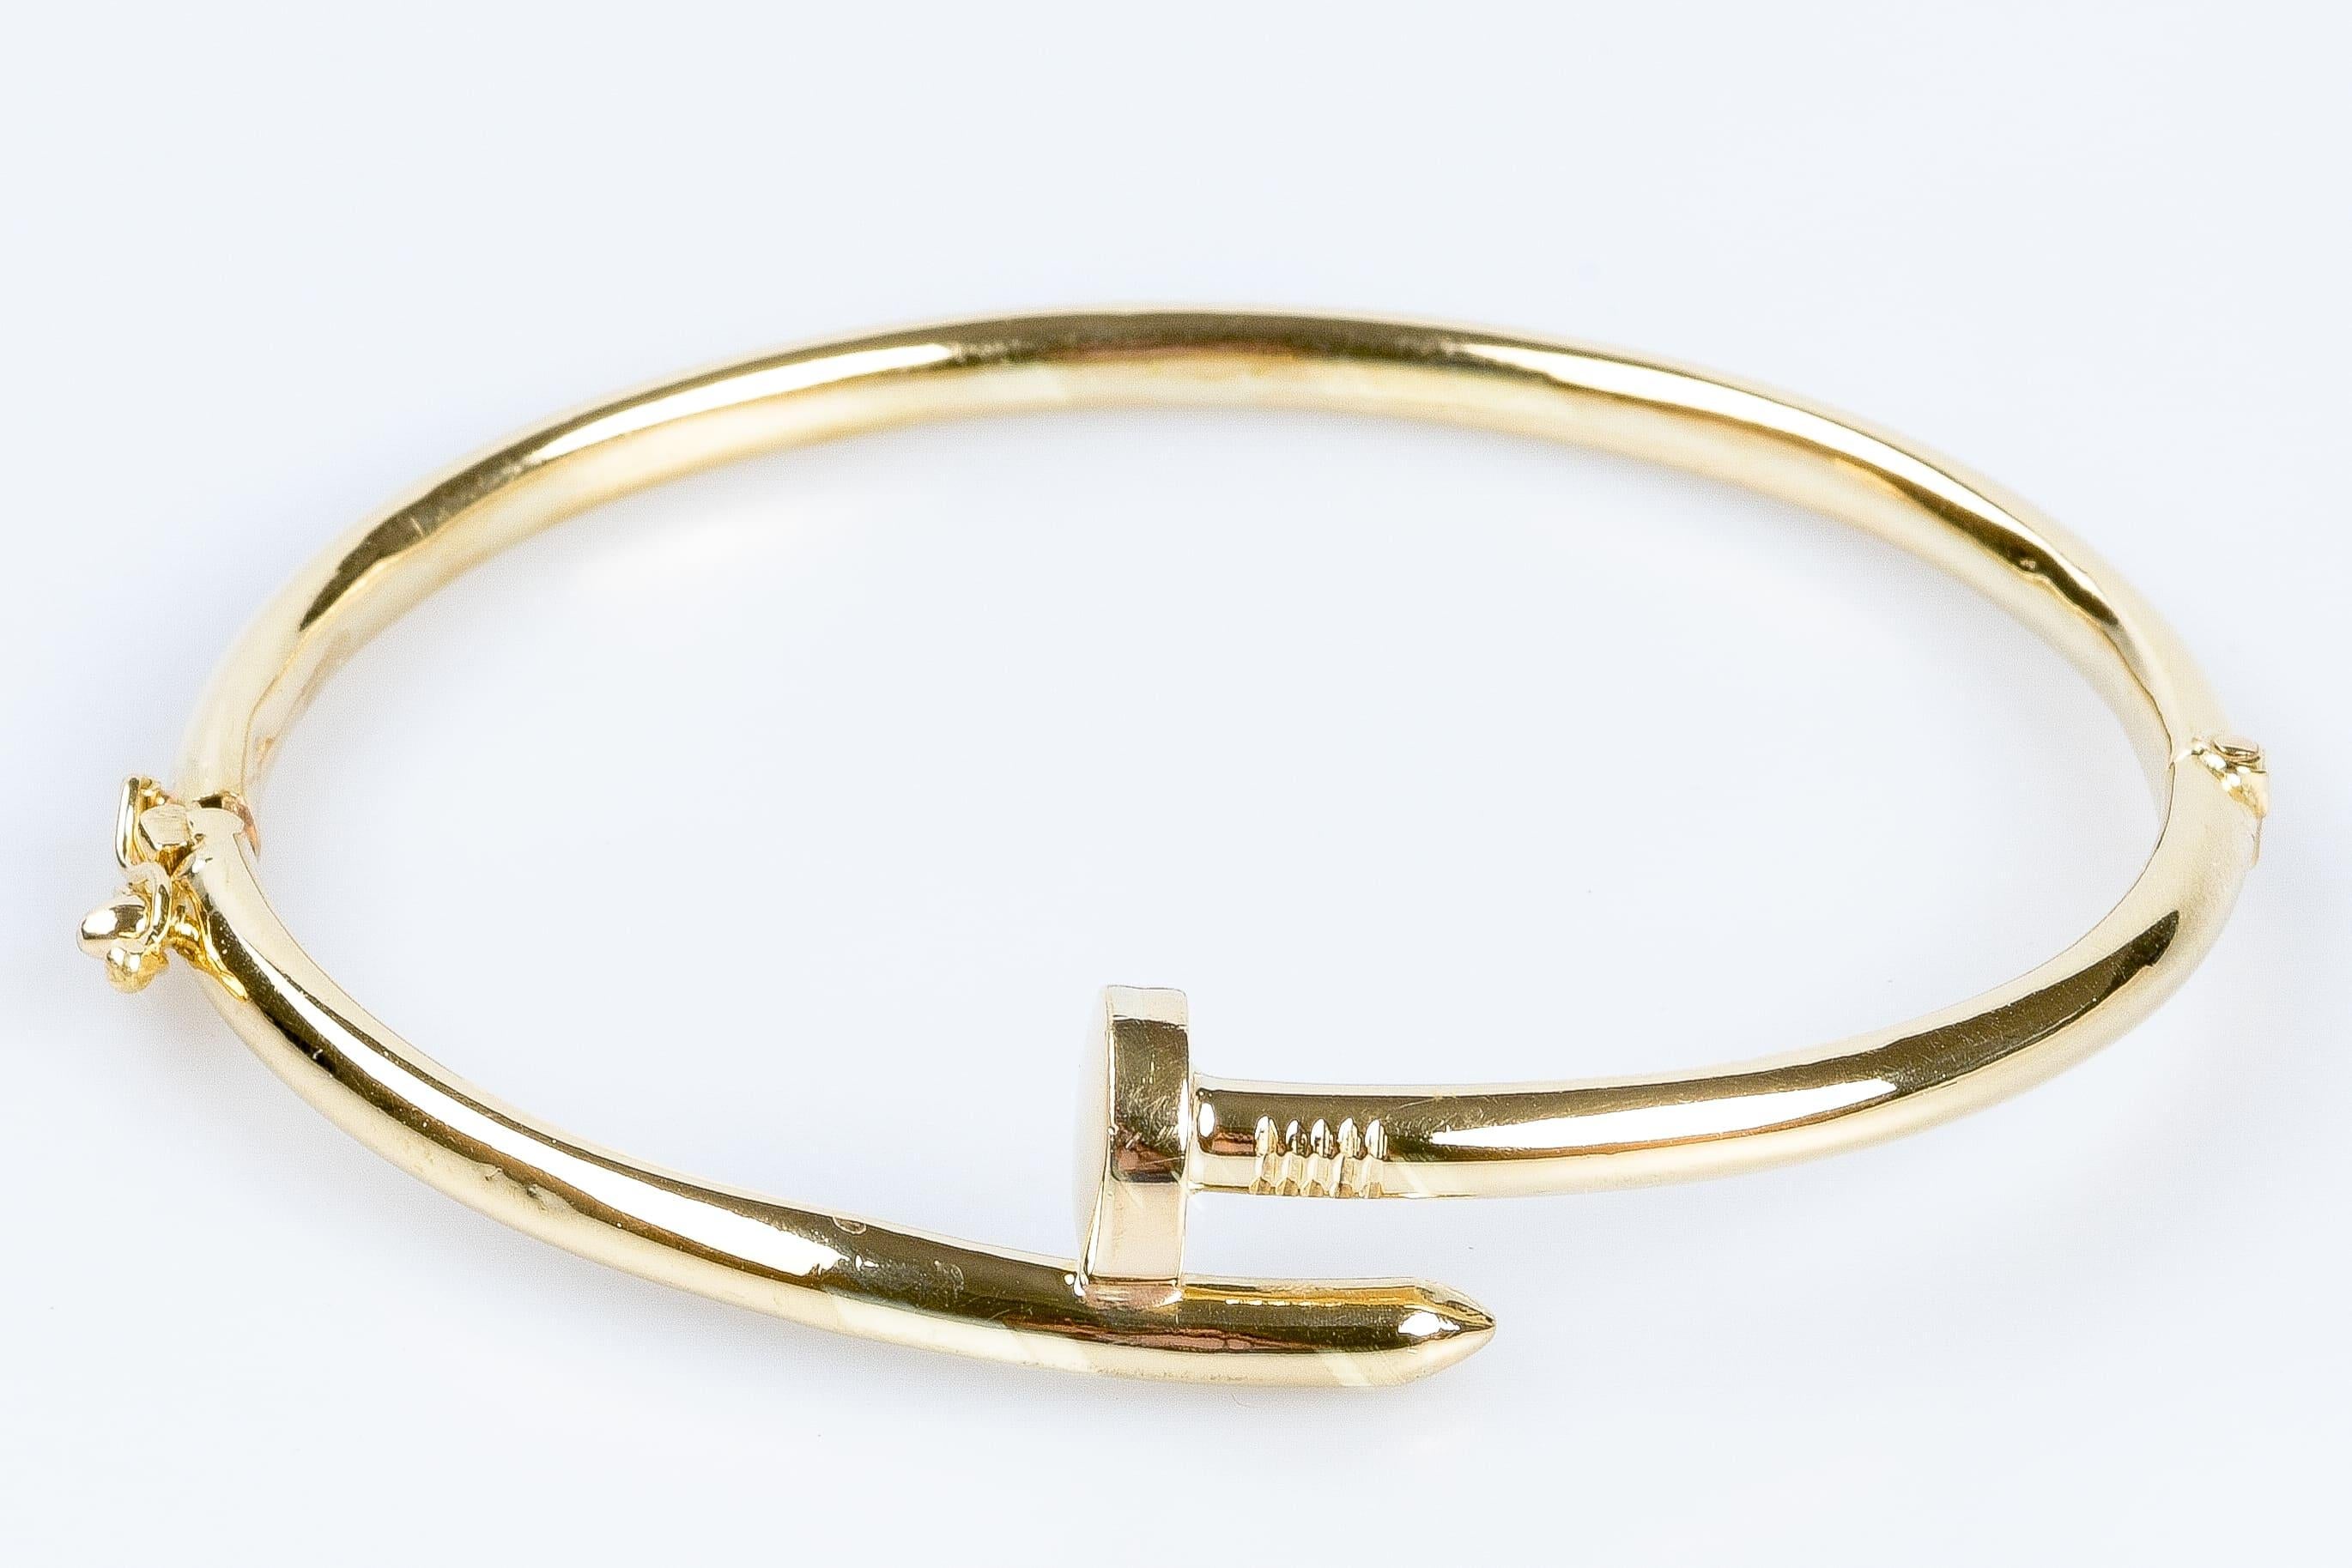 18K Yellow Gold Nail-Shaped Bracelet. This bracelet has a curved shape that fits the wrist and a clasp that allows you to put it on and remove it very easily while guaranteeing a safe and comfortable fit. The nail shape is elegant and fashionable